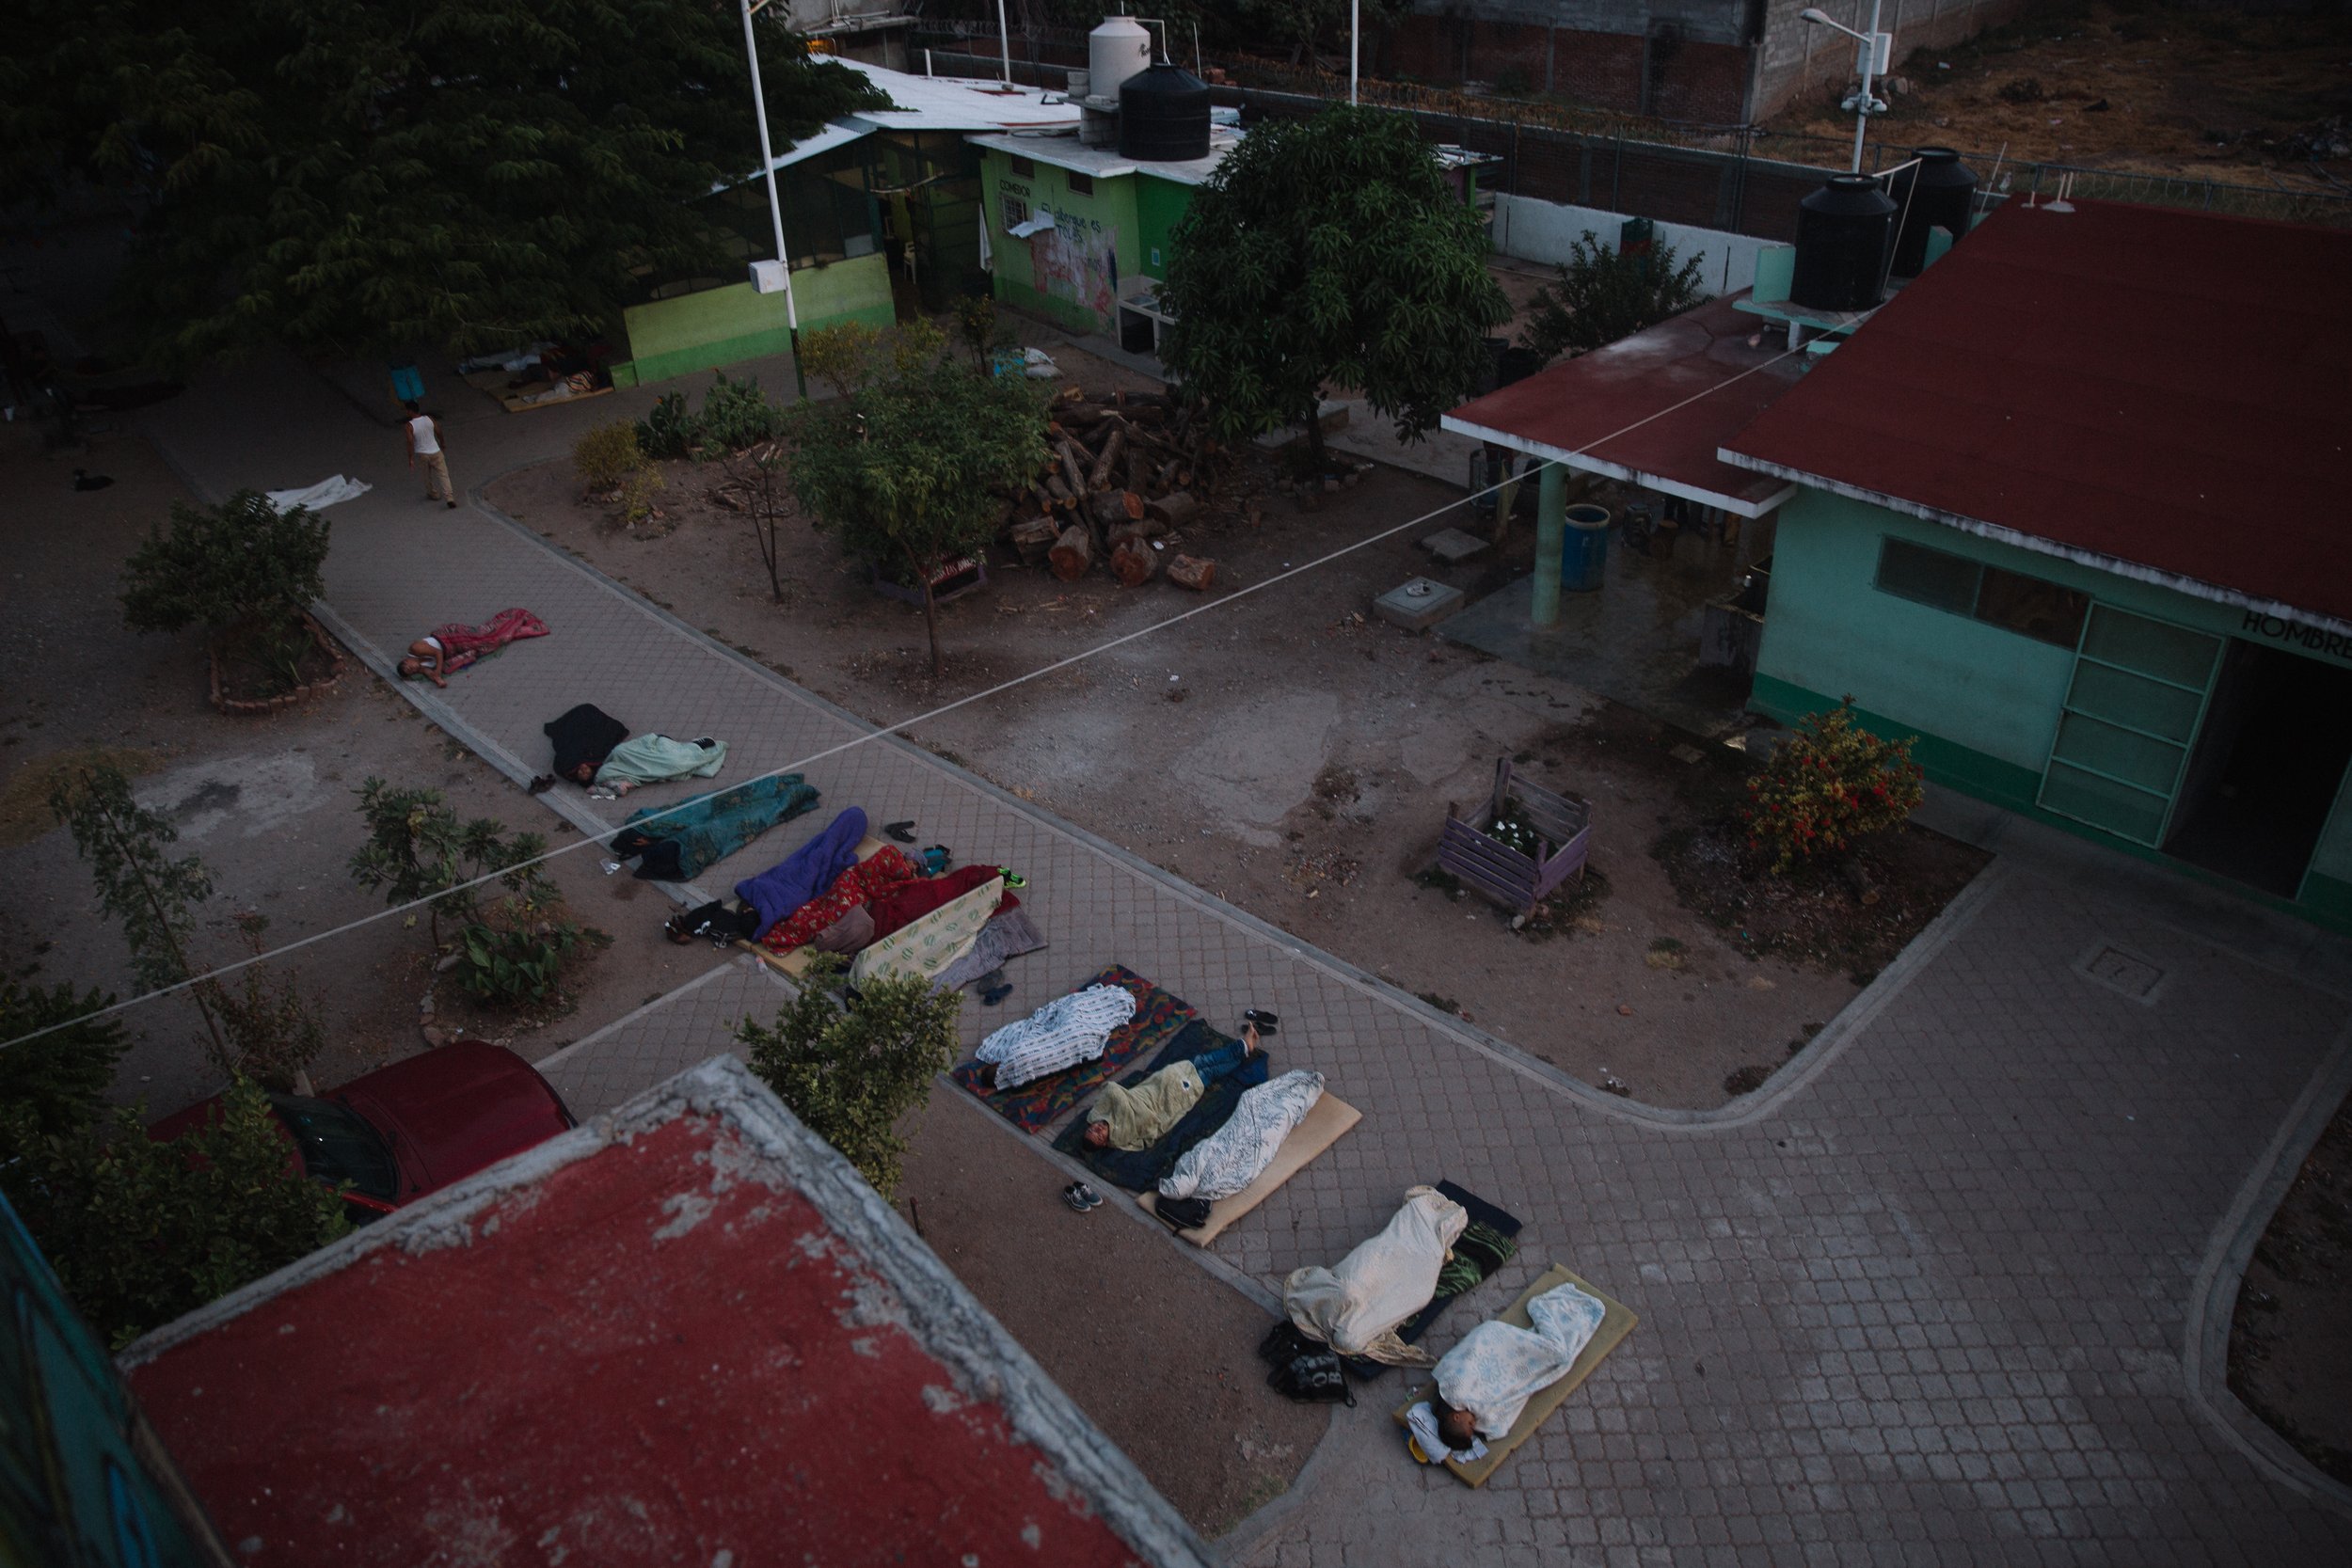  Due to the large number of migrants seeking refuge and support at the Migrant shelter "Hermanos en el Camino" in Ixtepec, Oaxaca, Mexico, there were not enough beds or space to accommodate everyone. As a result, several migrants were forced to sleep